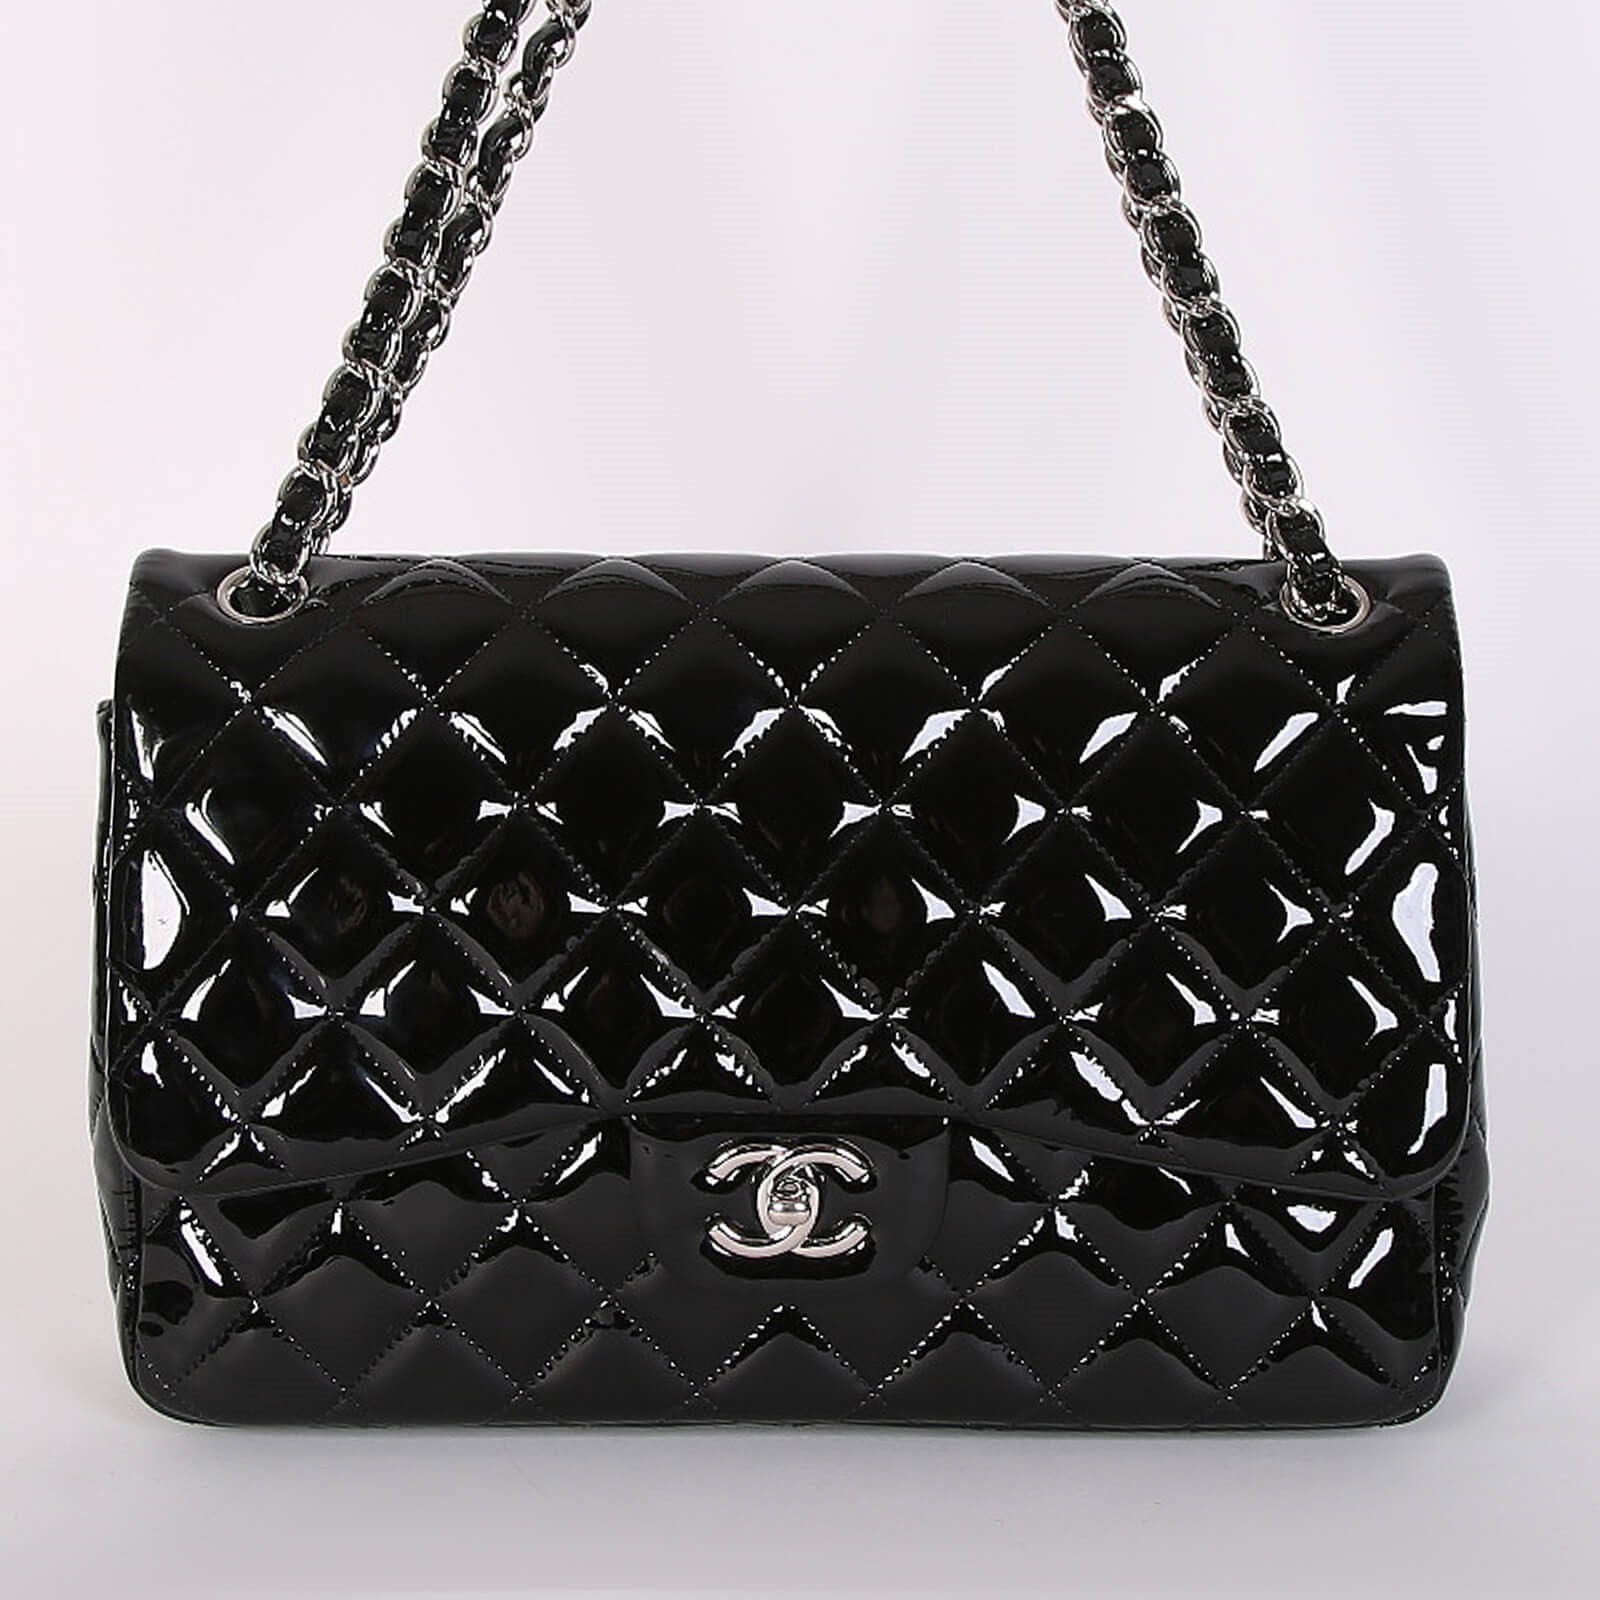 CHANEL flap bag in black wool and aged leather - VALOIS VINTAGE PARIS